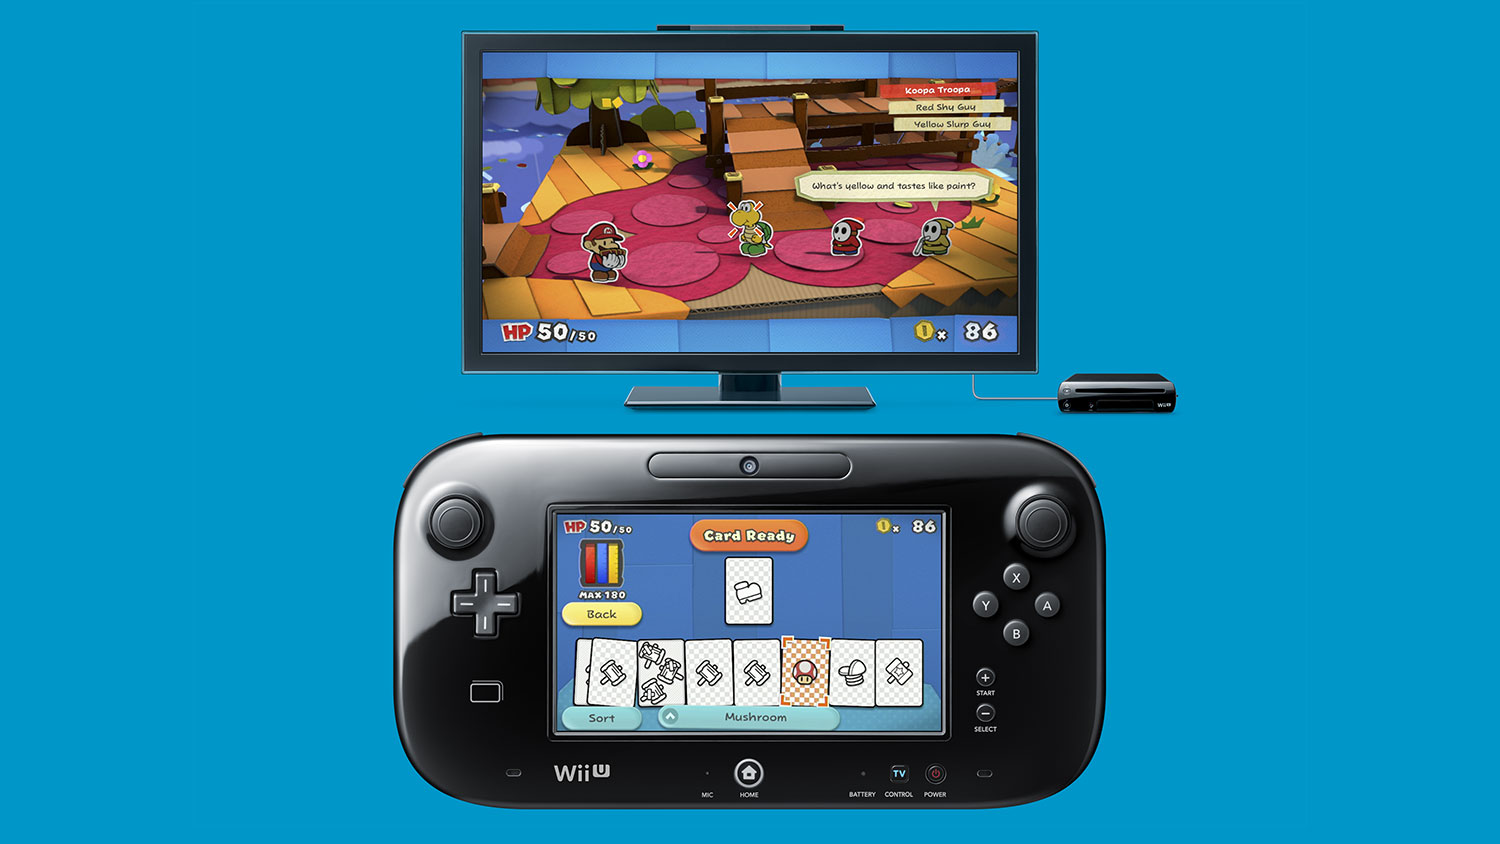 Report: Not many Nintendo Wii U units to go around at launch